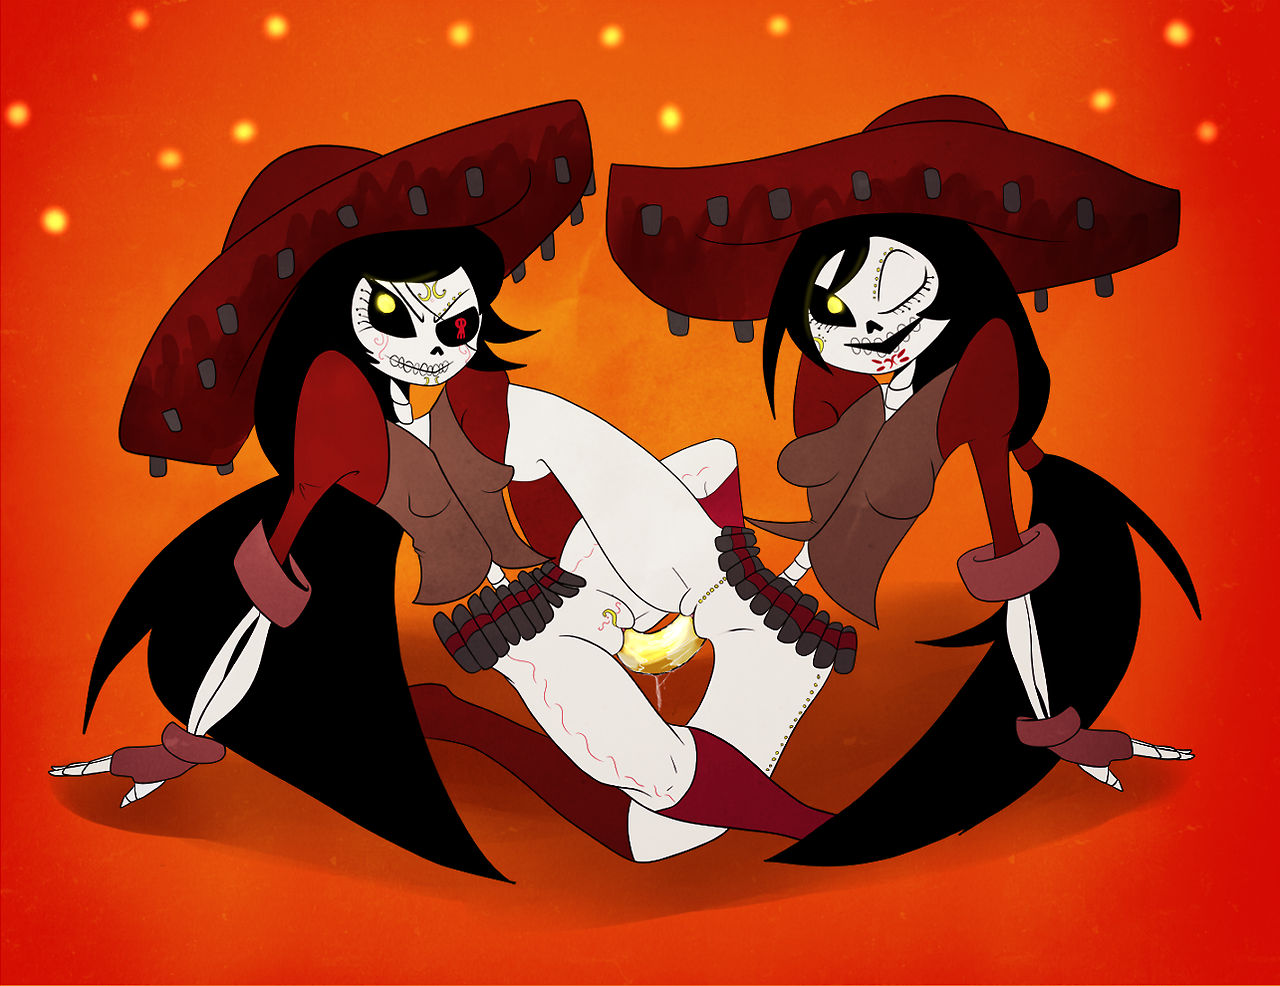 Naked The Book Of Life Porn - Book of Life Rule 34 Collection [32 Pics!] â€“ Page 2 â€“ Nerd Porn!